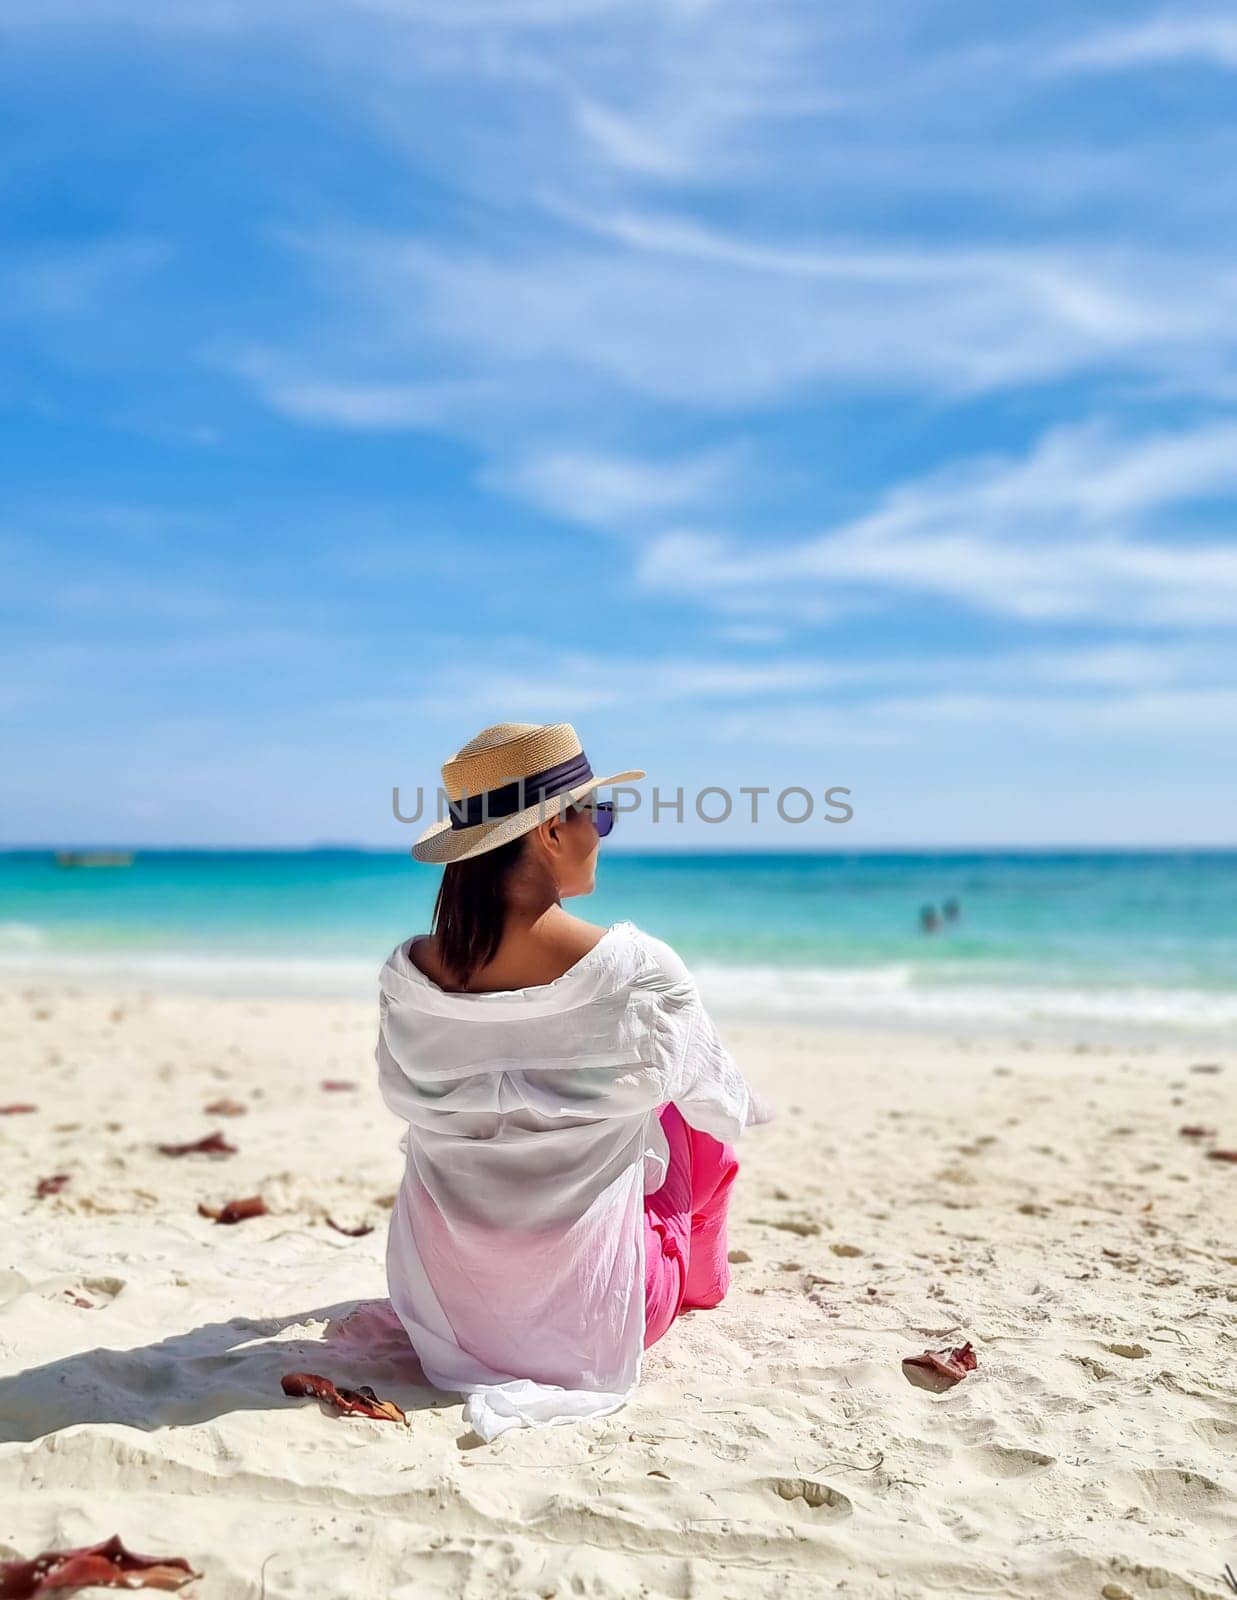 Koh Samet Island Rayong Thailand, white tropical beach of Samed Island with a turqouse colored ocean by fokkebok